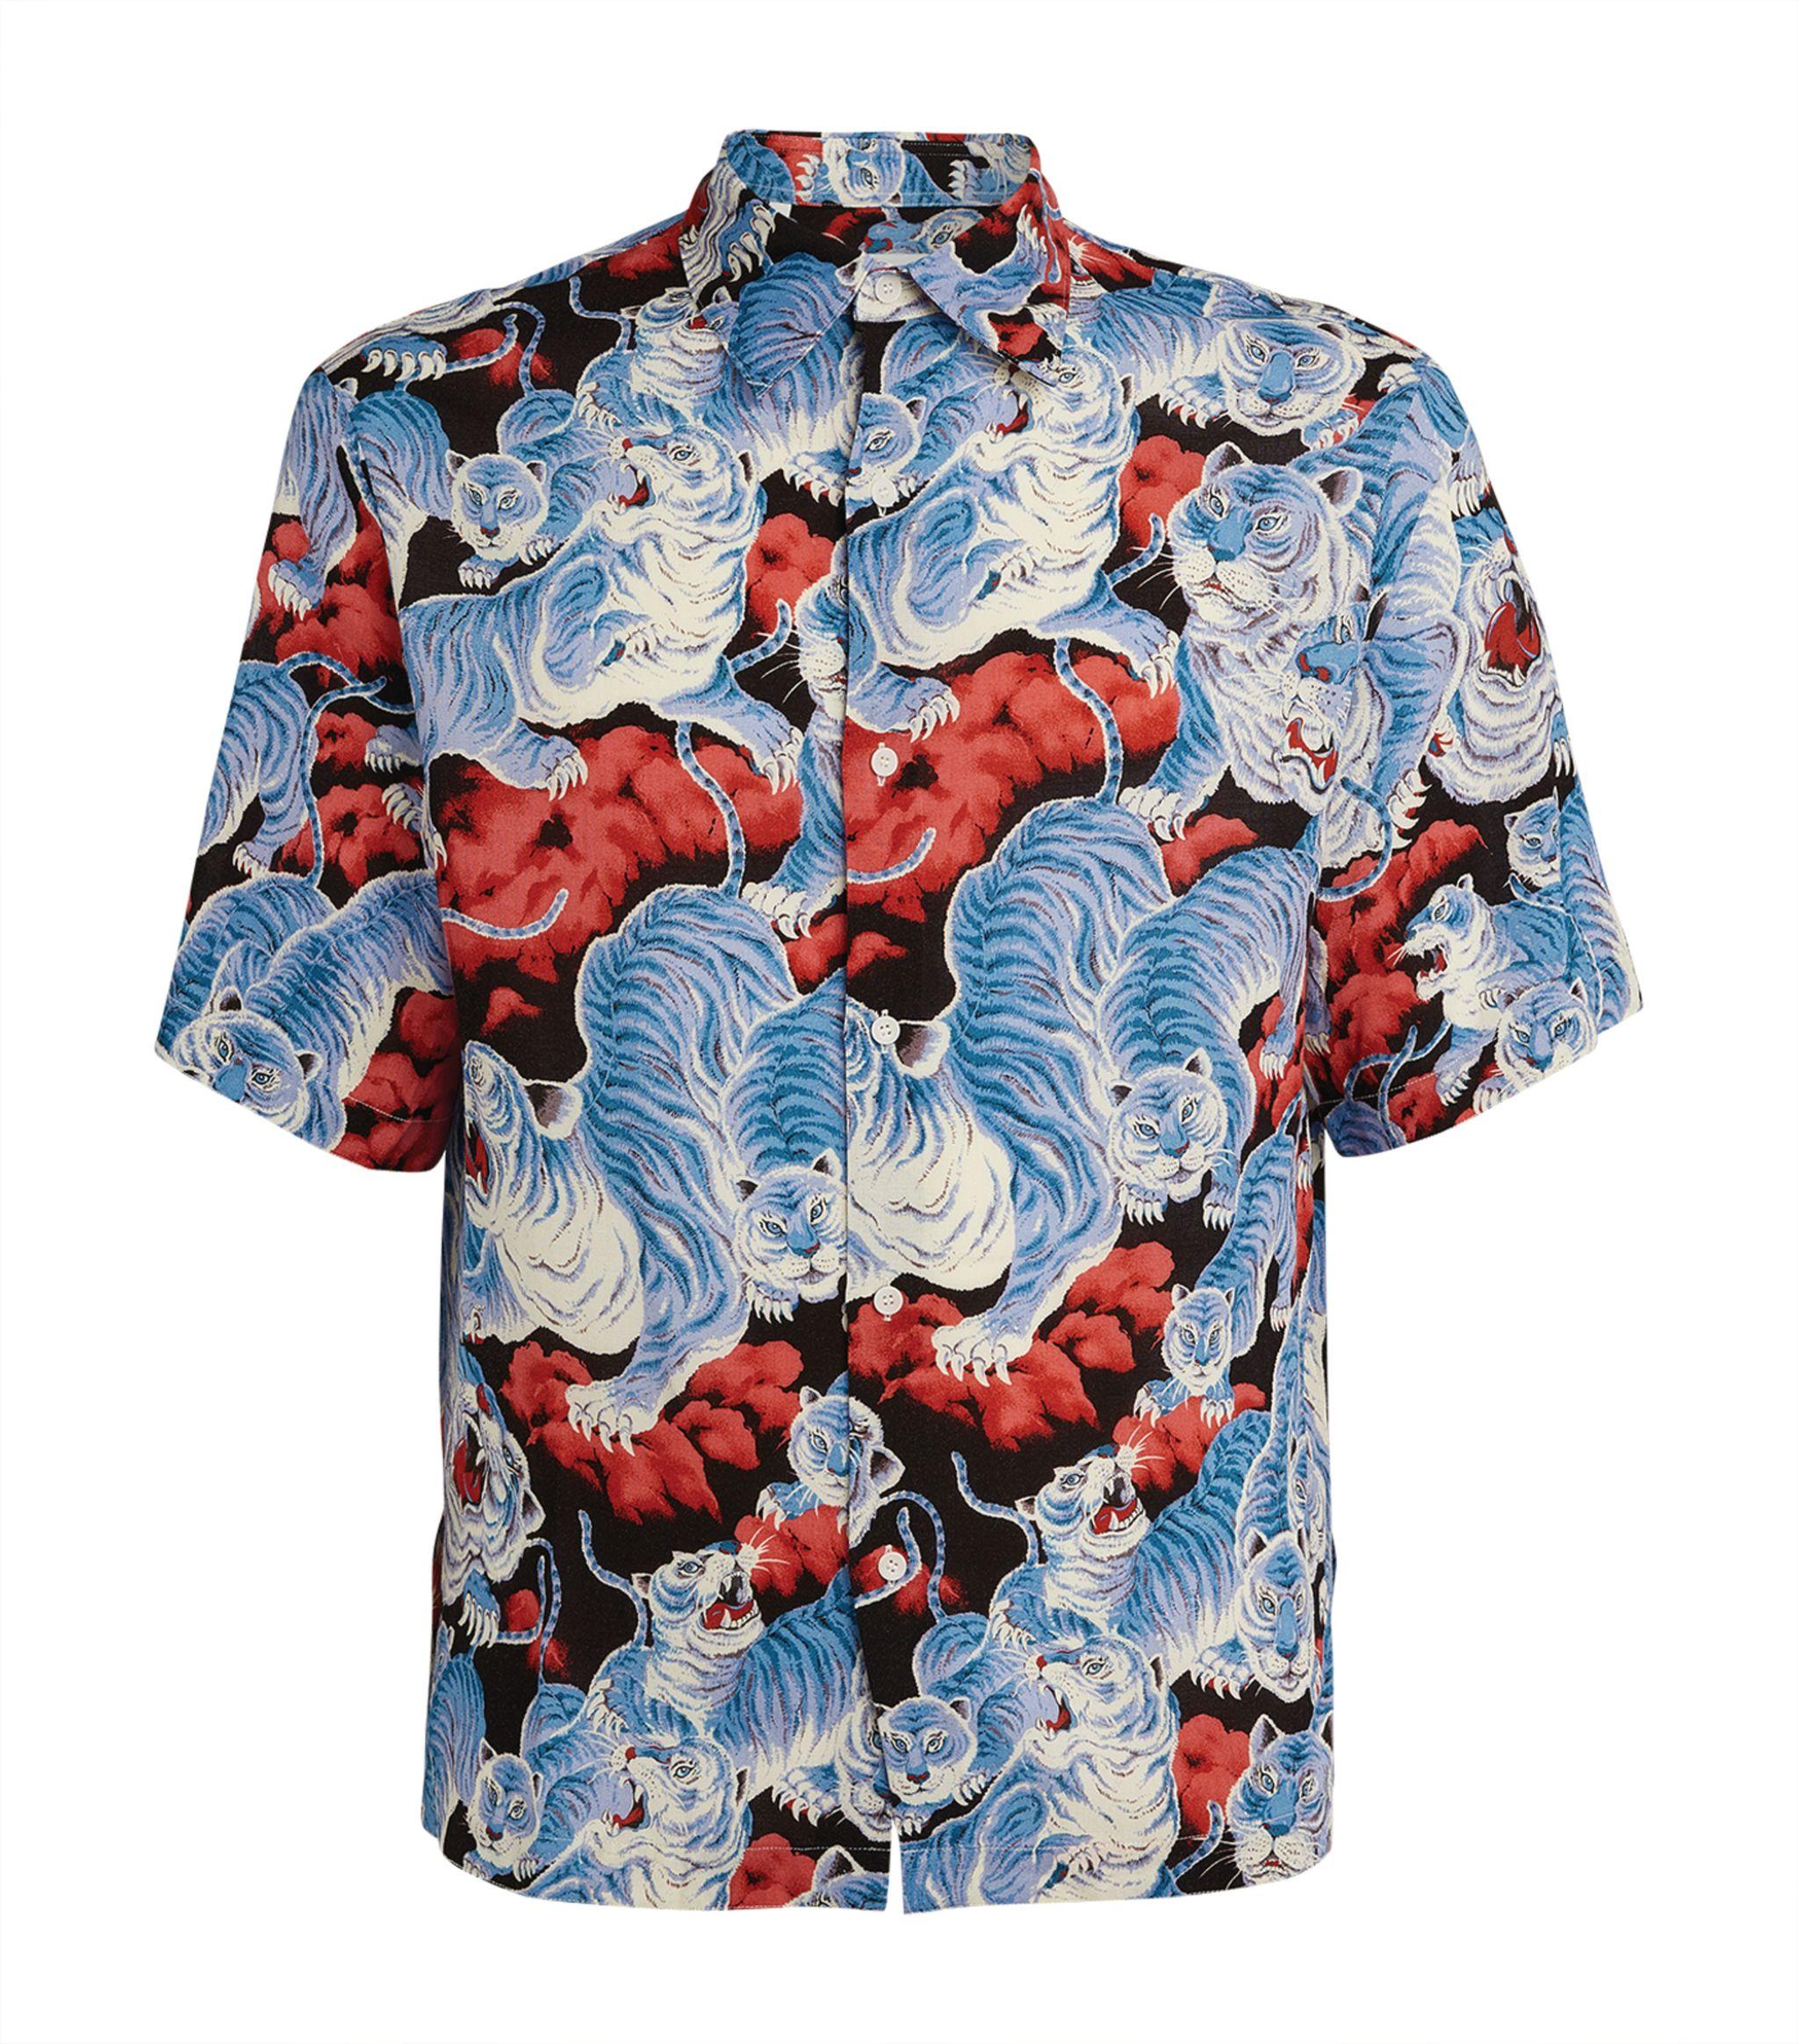 Sandro Wool Tiger Print Shirt in Blue for Men - Save 40% - Lyst